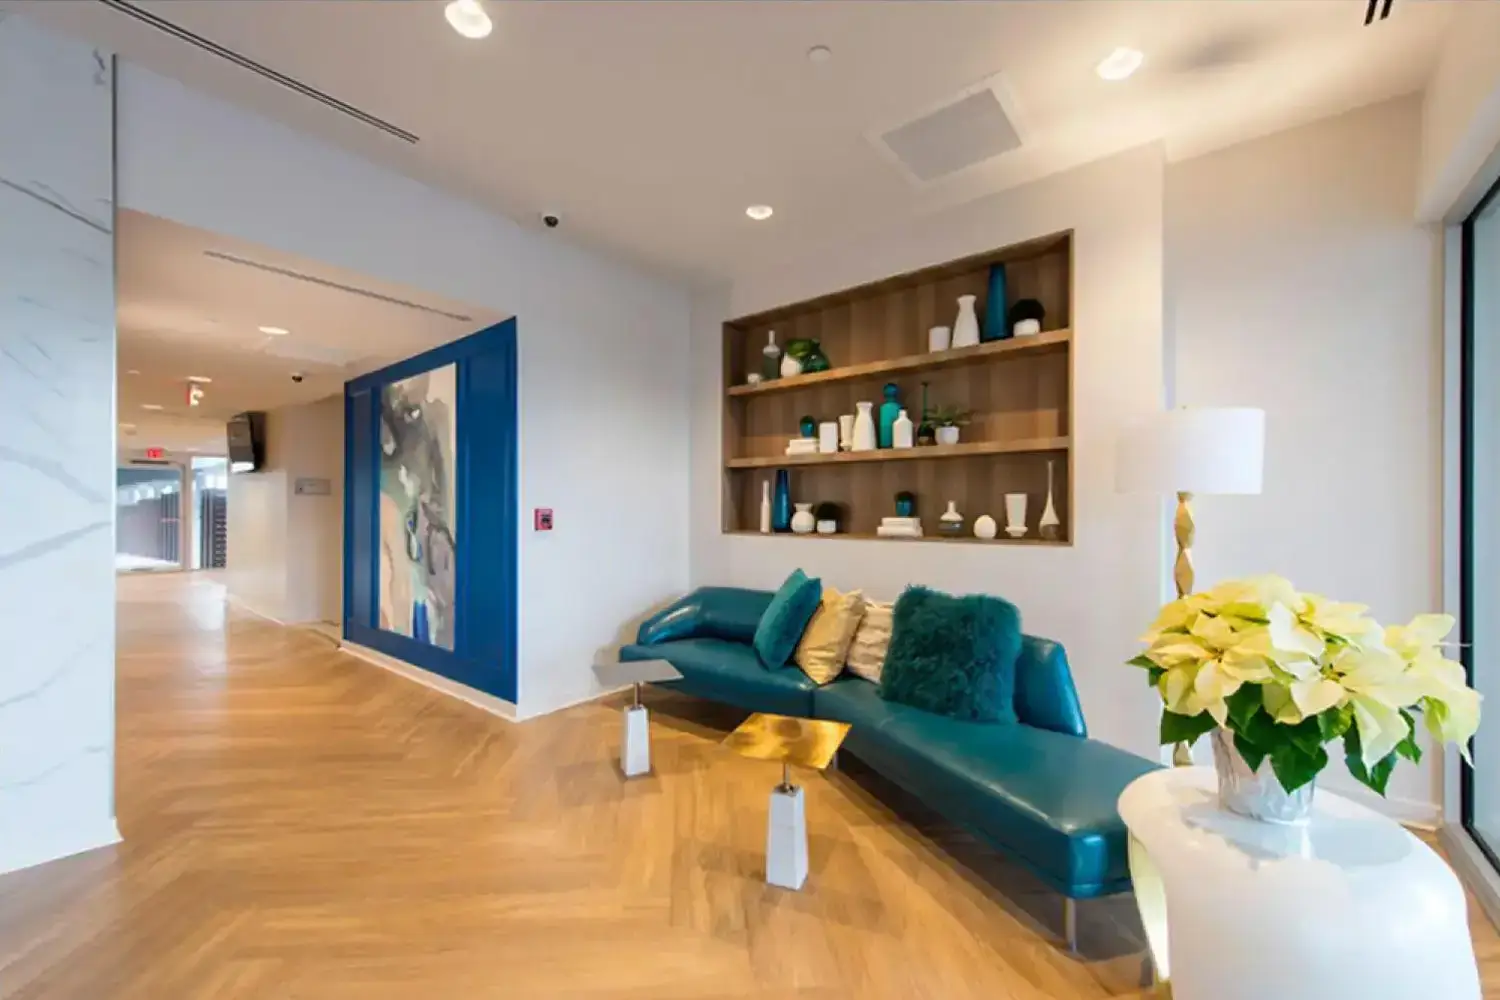 Modern and luxurious waiting area with a blue leather couch, green and gold throw pillows, white coffee table, and a hallway with a wooden floor.